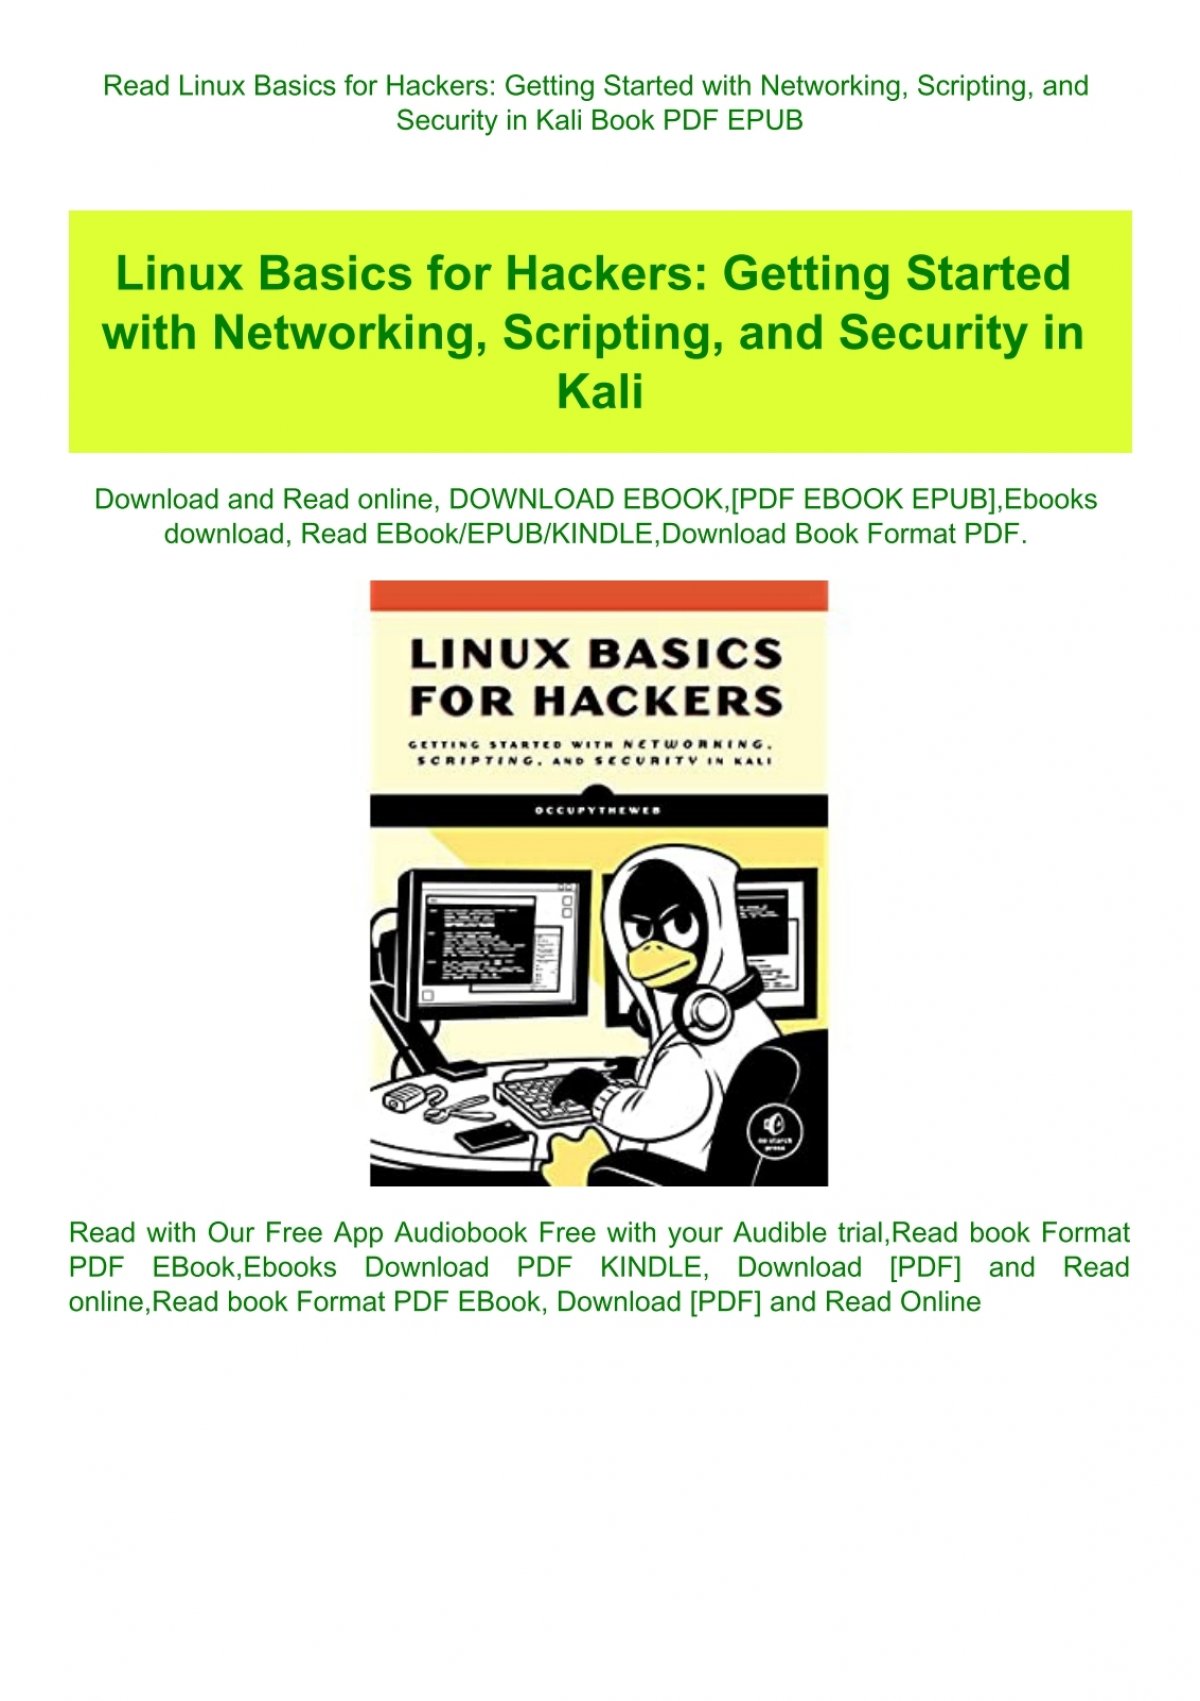 Read Linux Basics For Hackers Getting Started With Networking Scripting And Security In Kali Book Pdf Epub - app hack roblox login books pdf books to read online